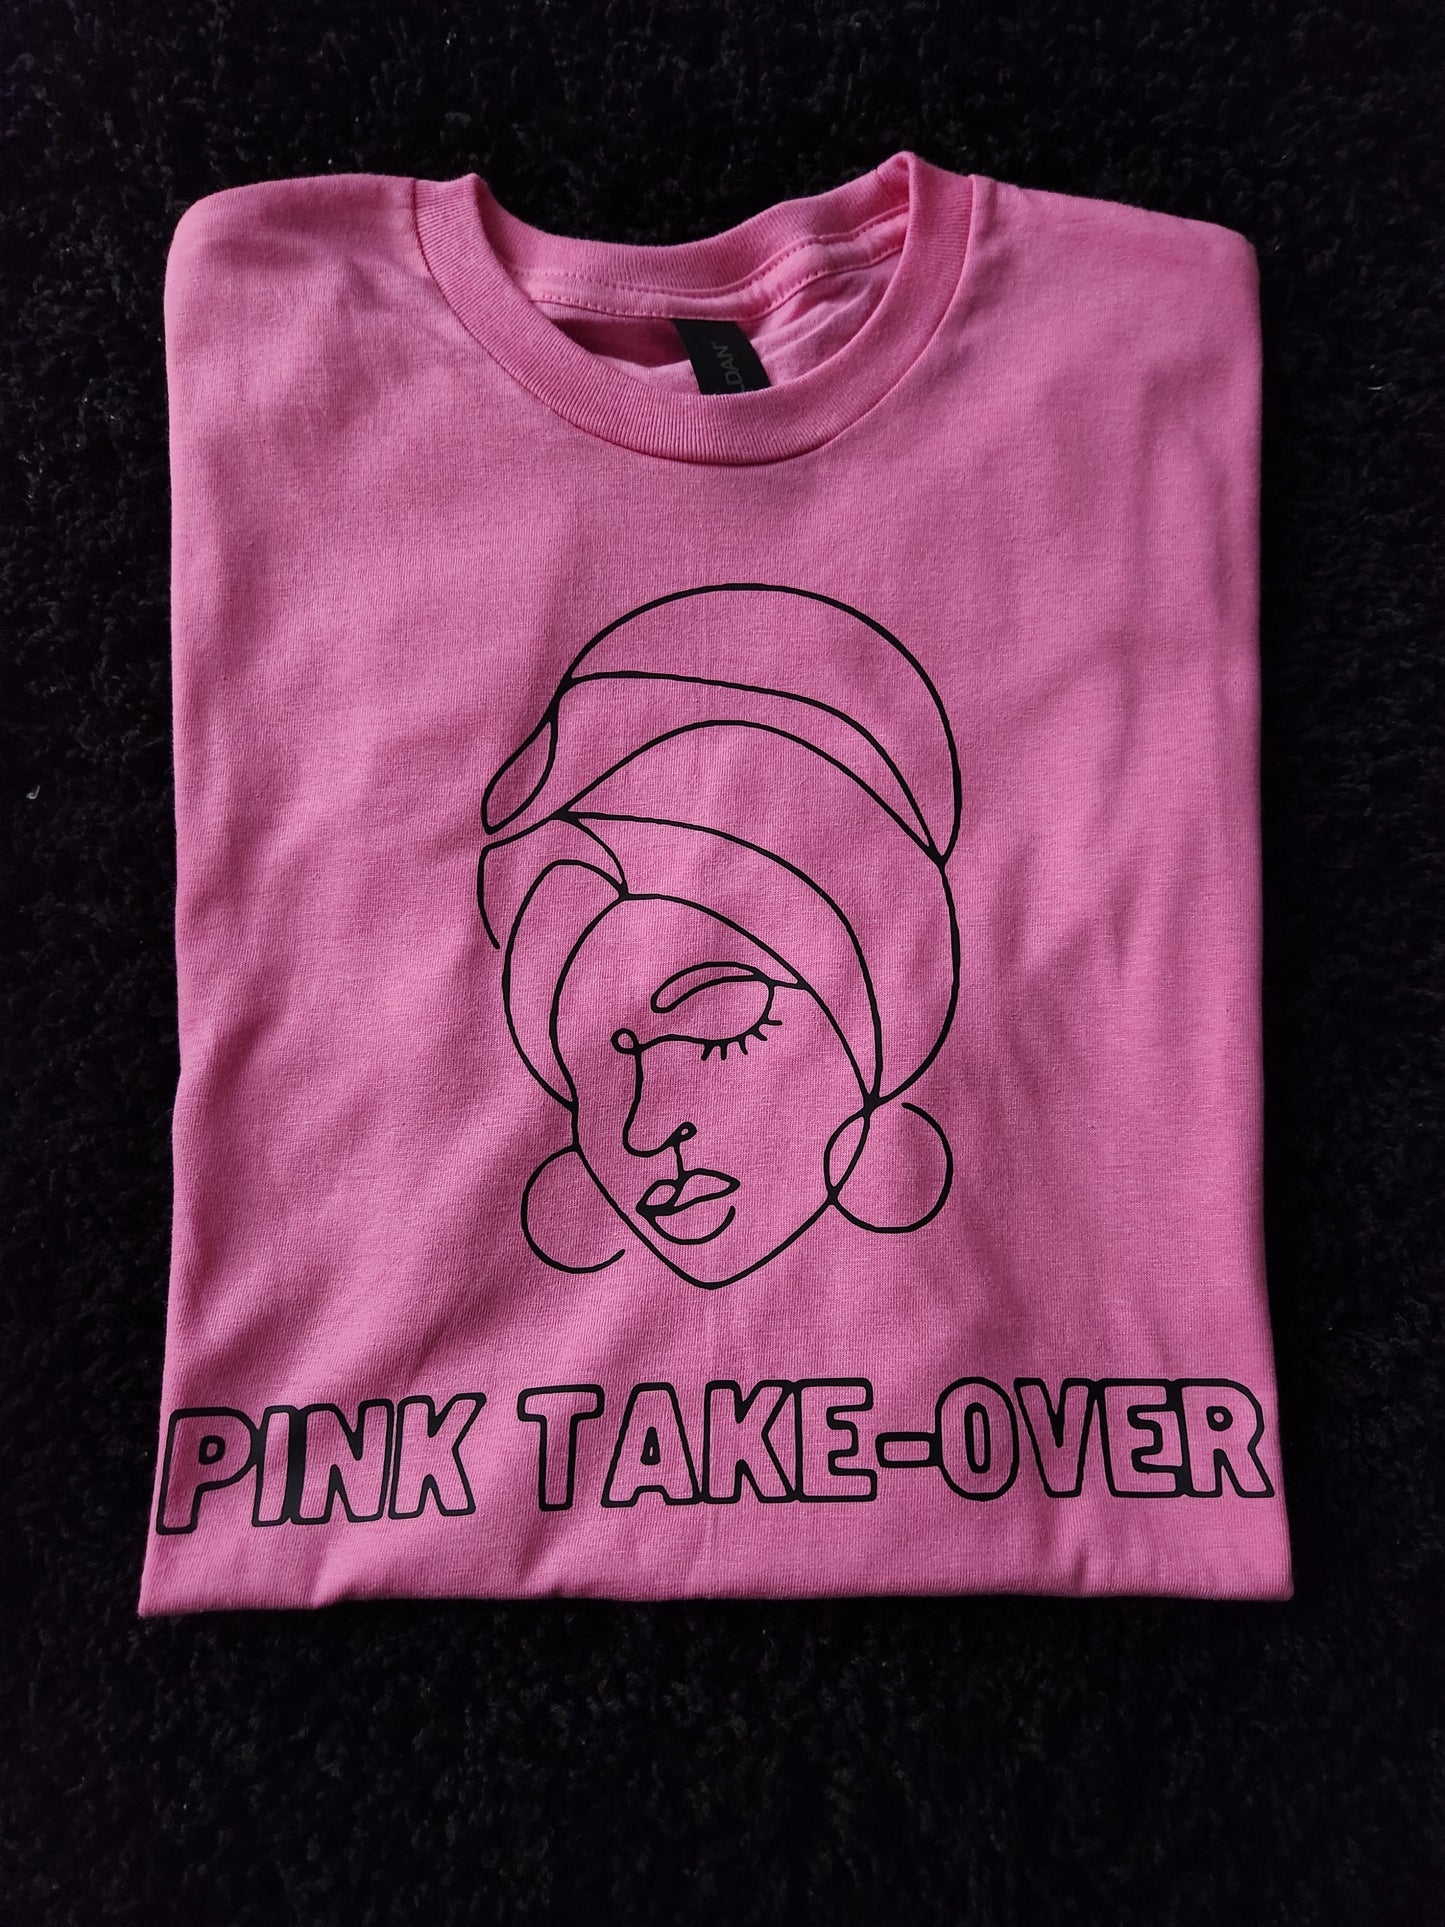 Pink Takeover T-shirt